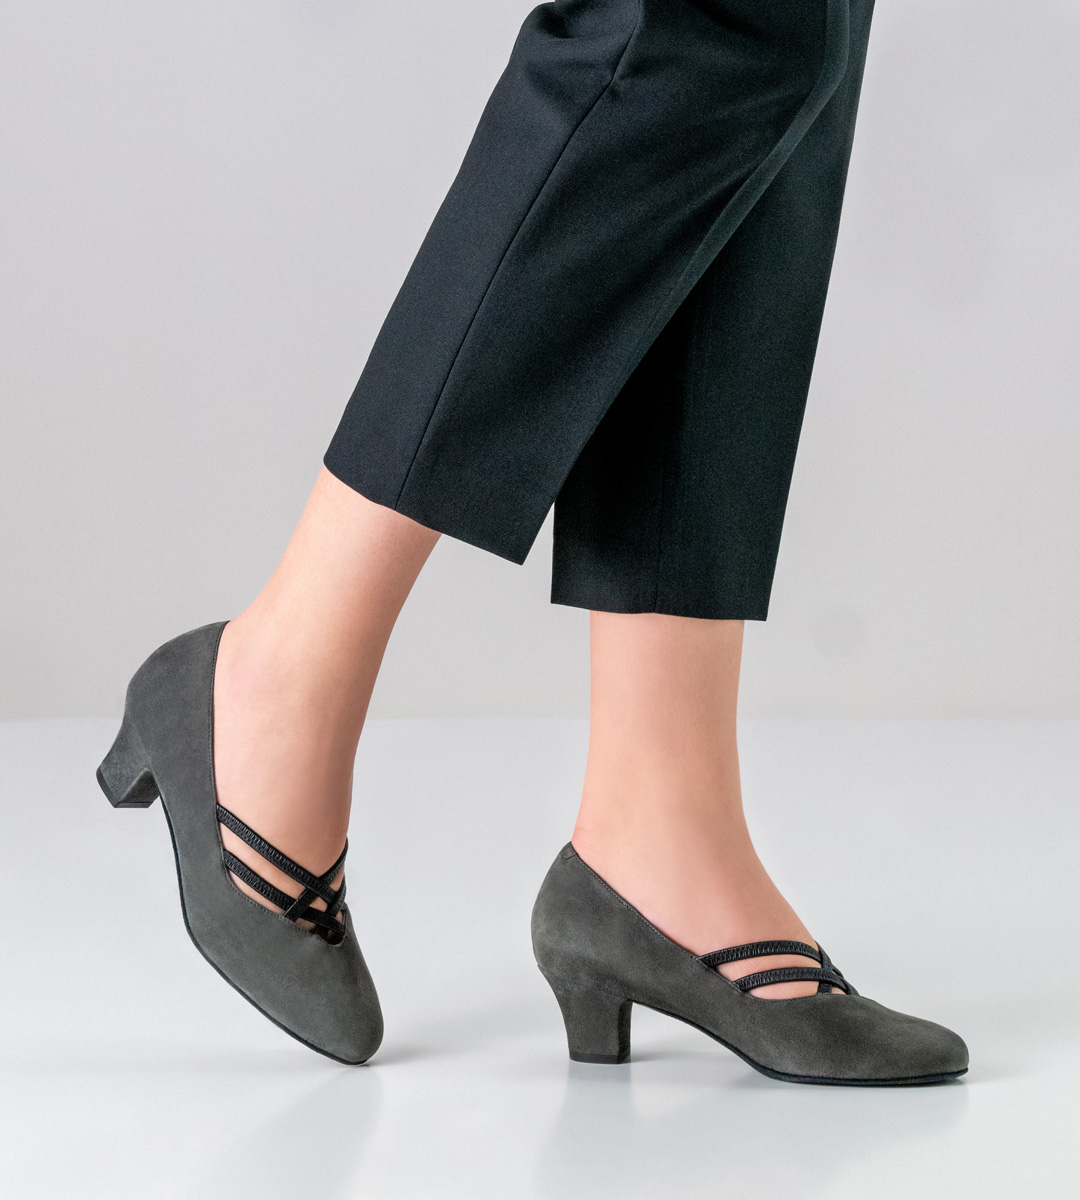 Black trousers in combination with 4.5 cm high Werner Kern ladies' dance shoe